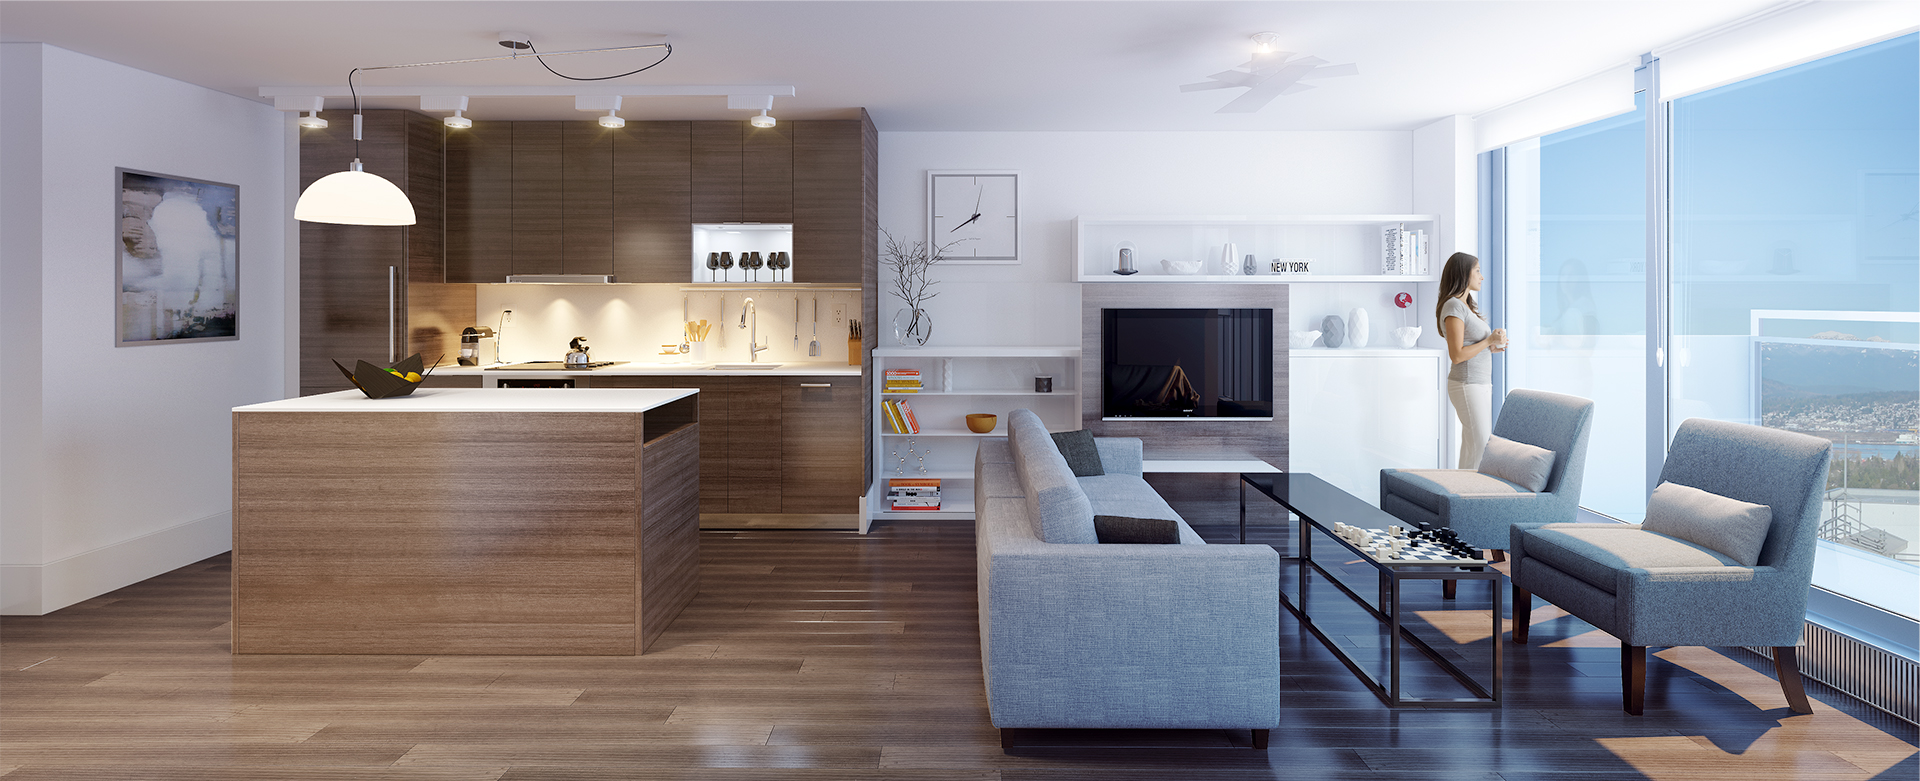 small kitchen and lounge design combined